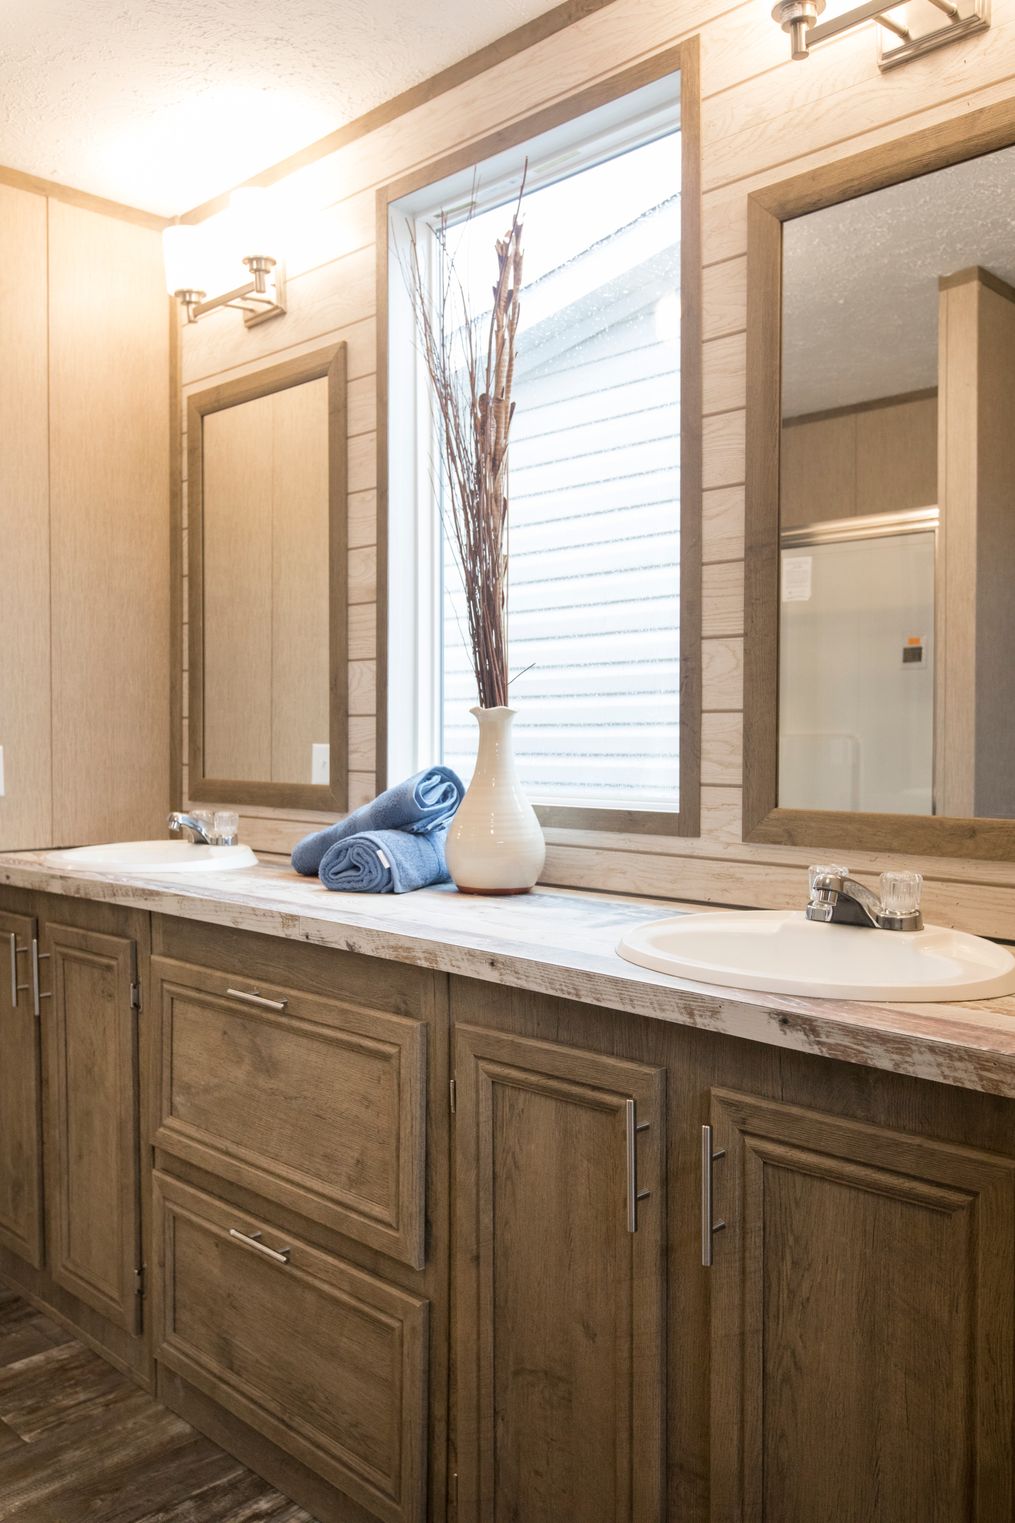 The THE CREEKWOOD Master Bathroom. This Manufactured Mobile Home features 4 bedrooms and 2 baths.